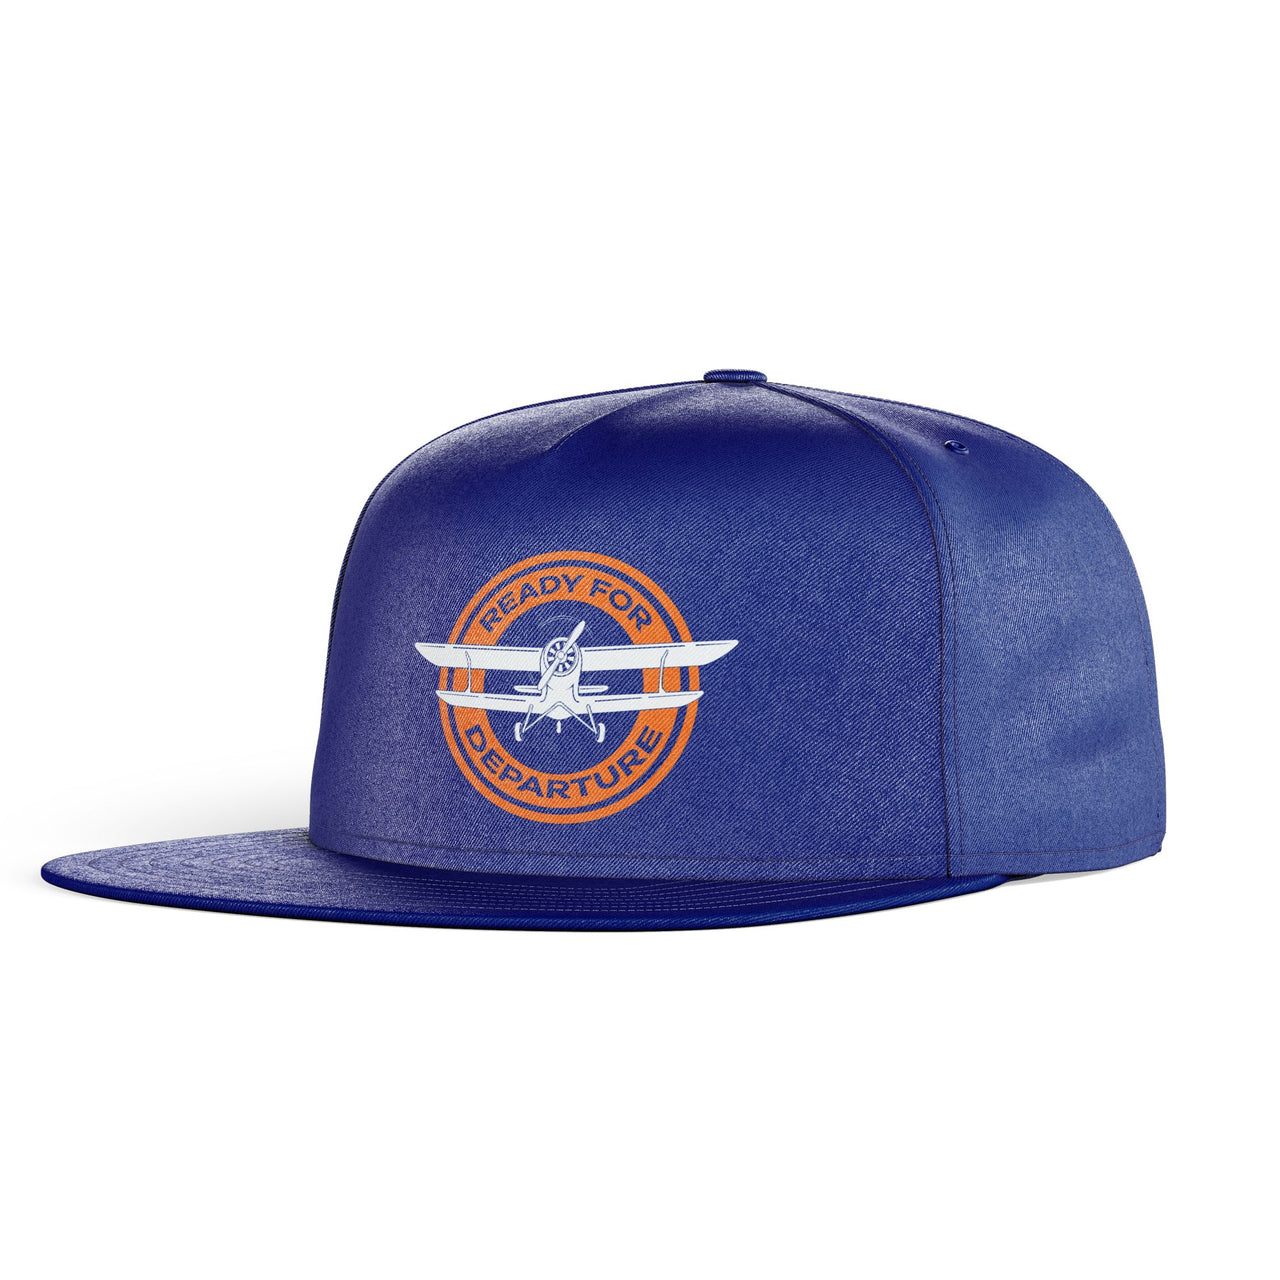 Ready for Departure Designed Snapback Caps & Hats